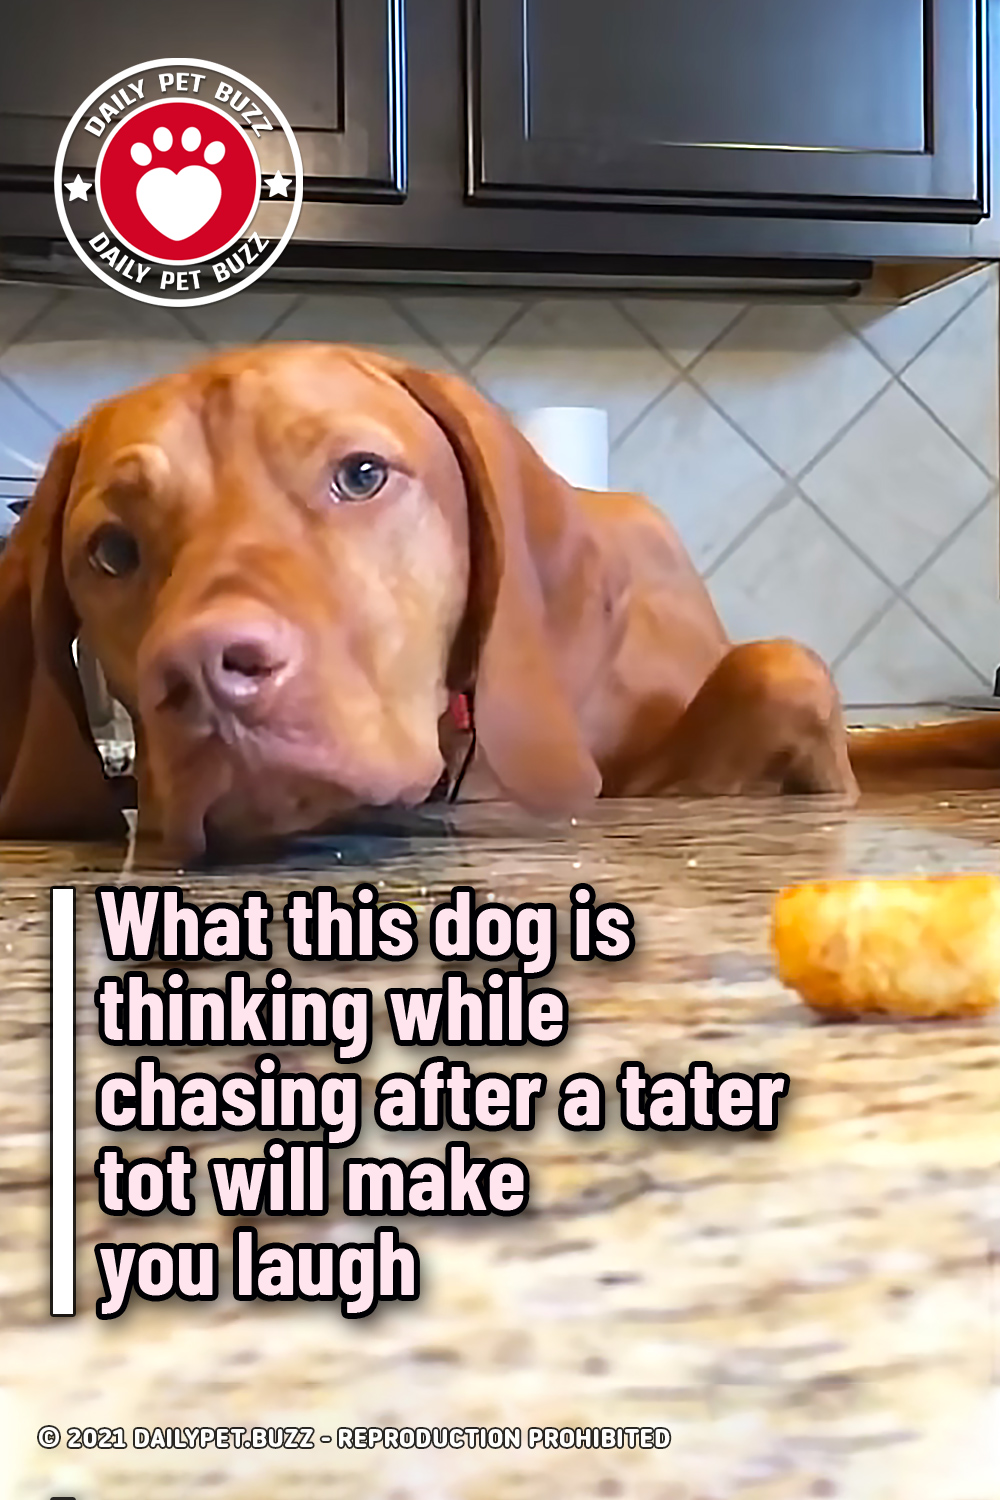 What this dog is thinking while chasing after a tater tot will make you laugh